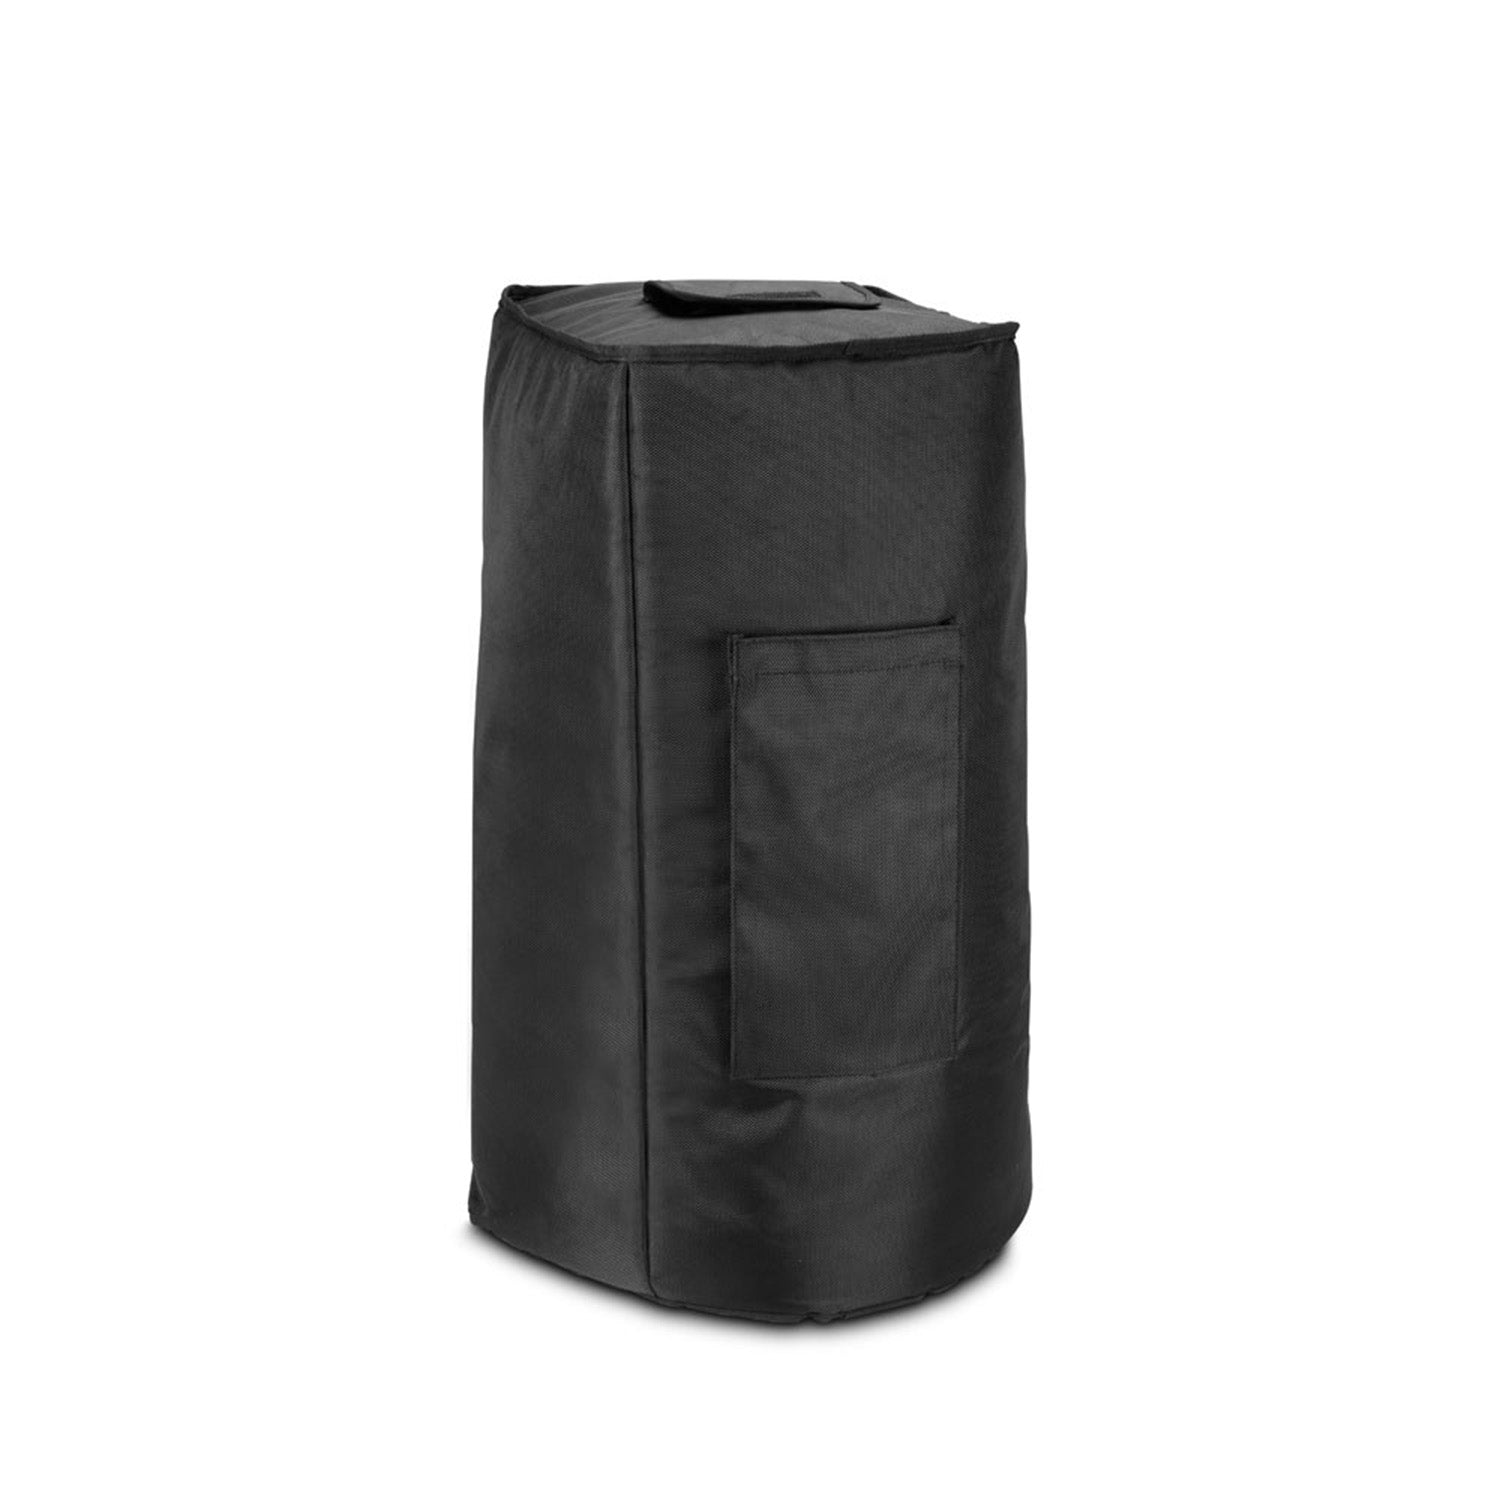 LD Systems MAUI 11 G2 SUB PC Padded Protective Cover for MAUI 11 G2 Subwoofer - Hollywood DJ